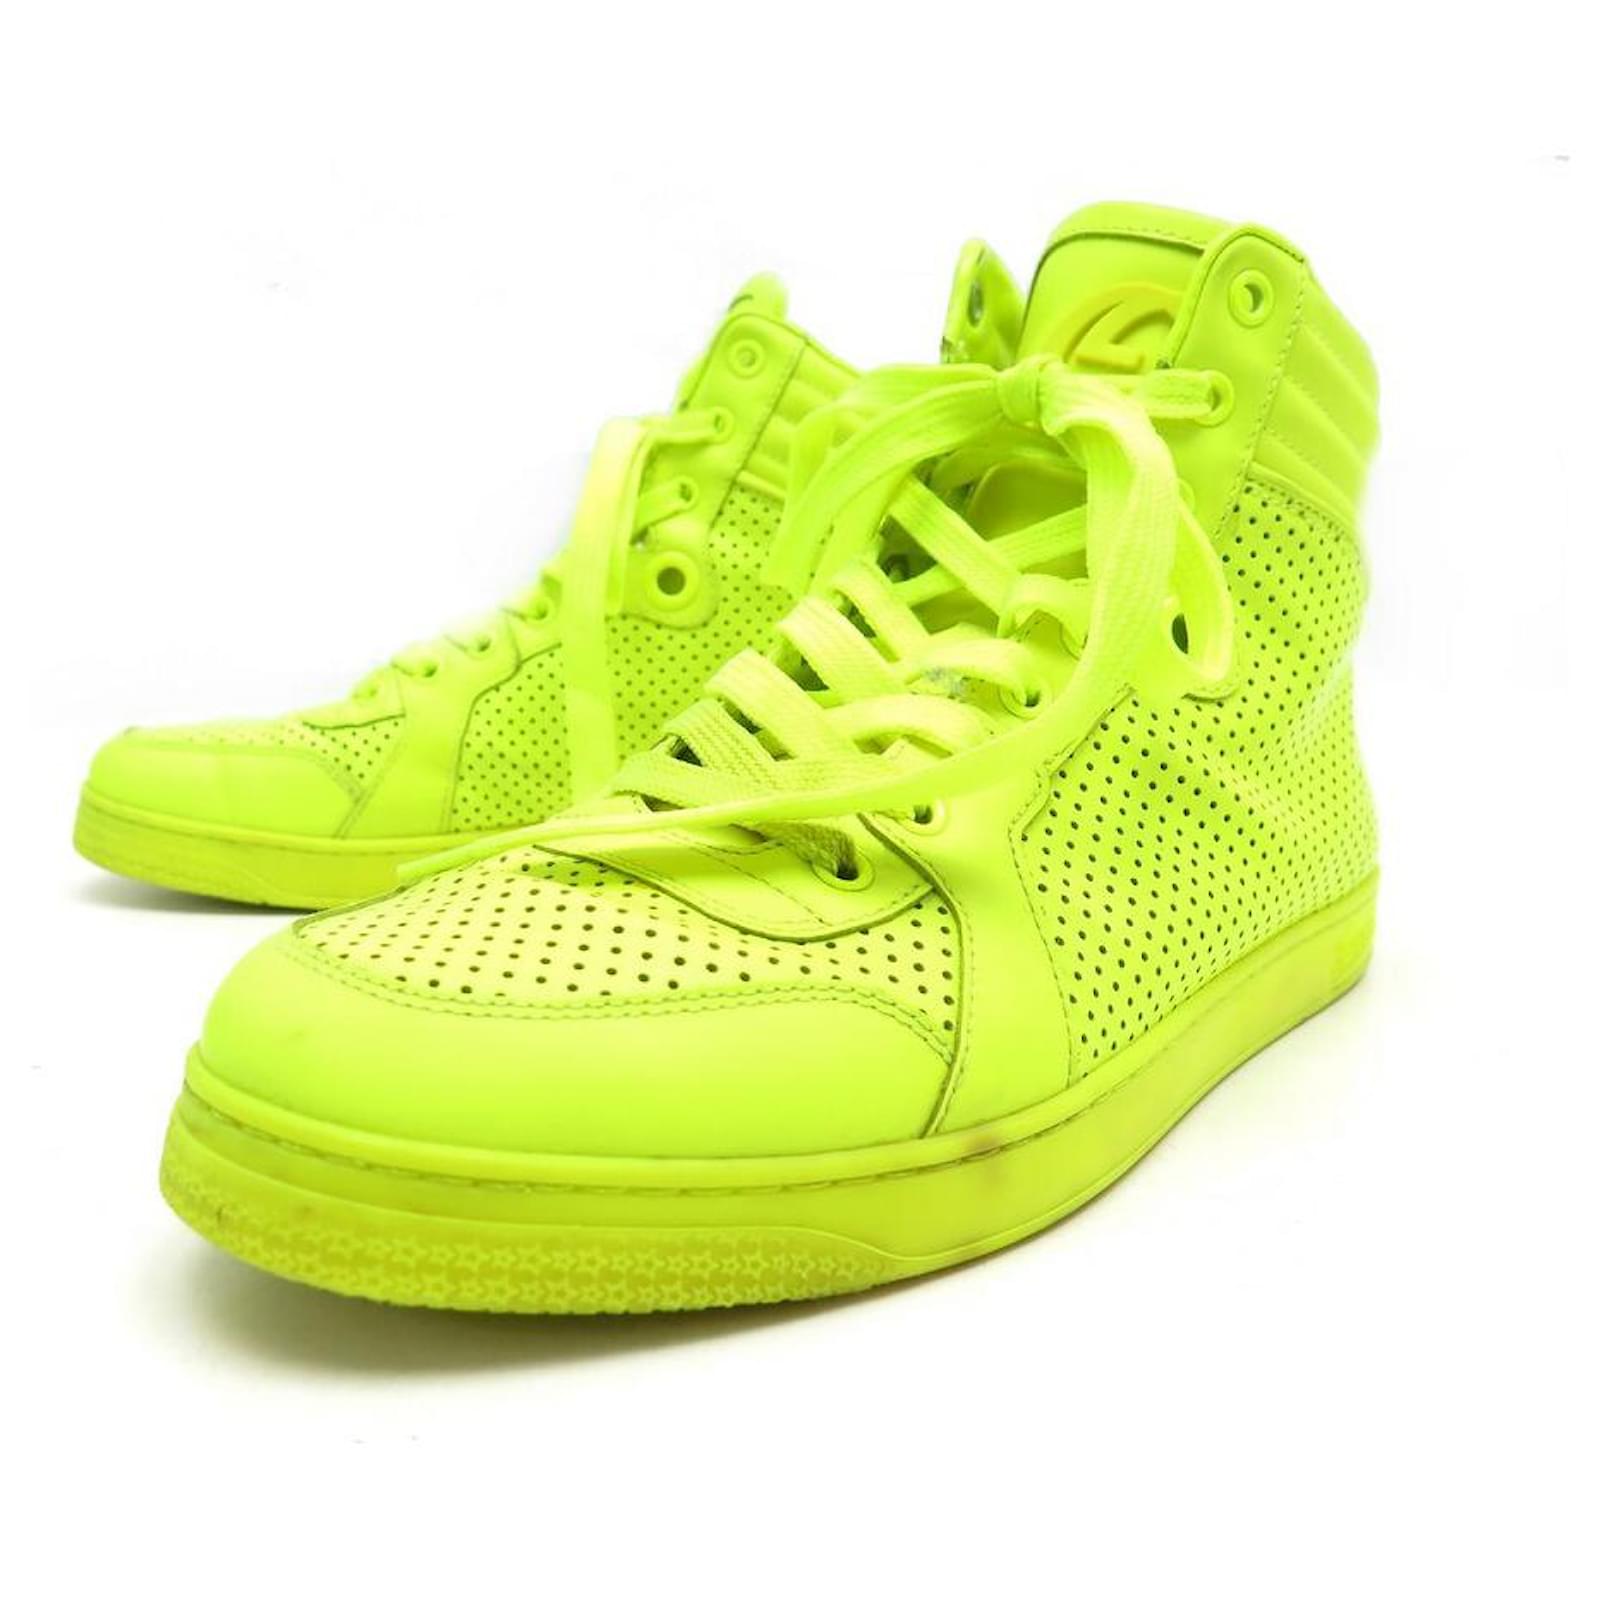 schudden Scully Min GUCCI CODA NEON PERFORATED LEATHER SHOES 323812 6.5 41.5 High sneakers  Green ref.663541 - Joli Closet